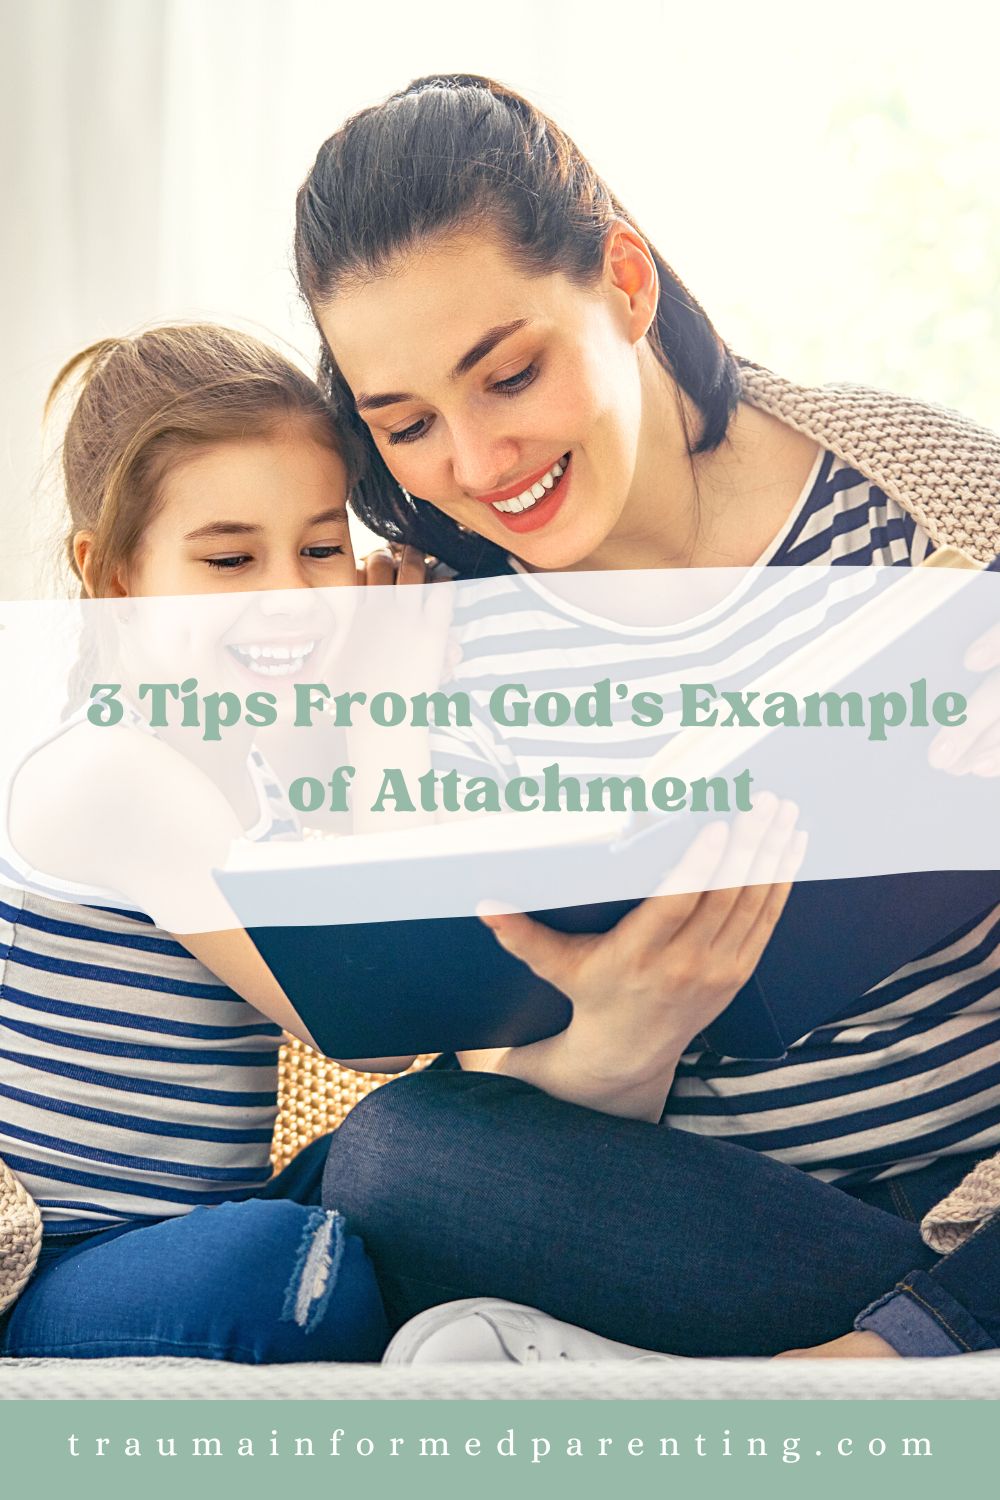 3 Tips From God’s Example of Attachment